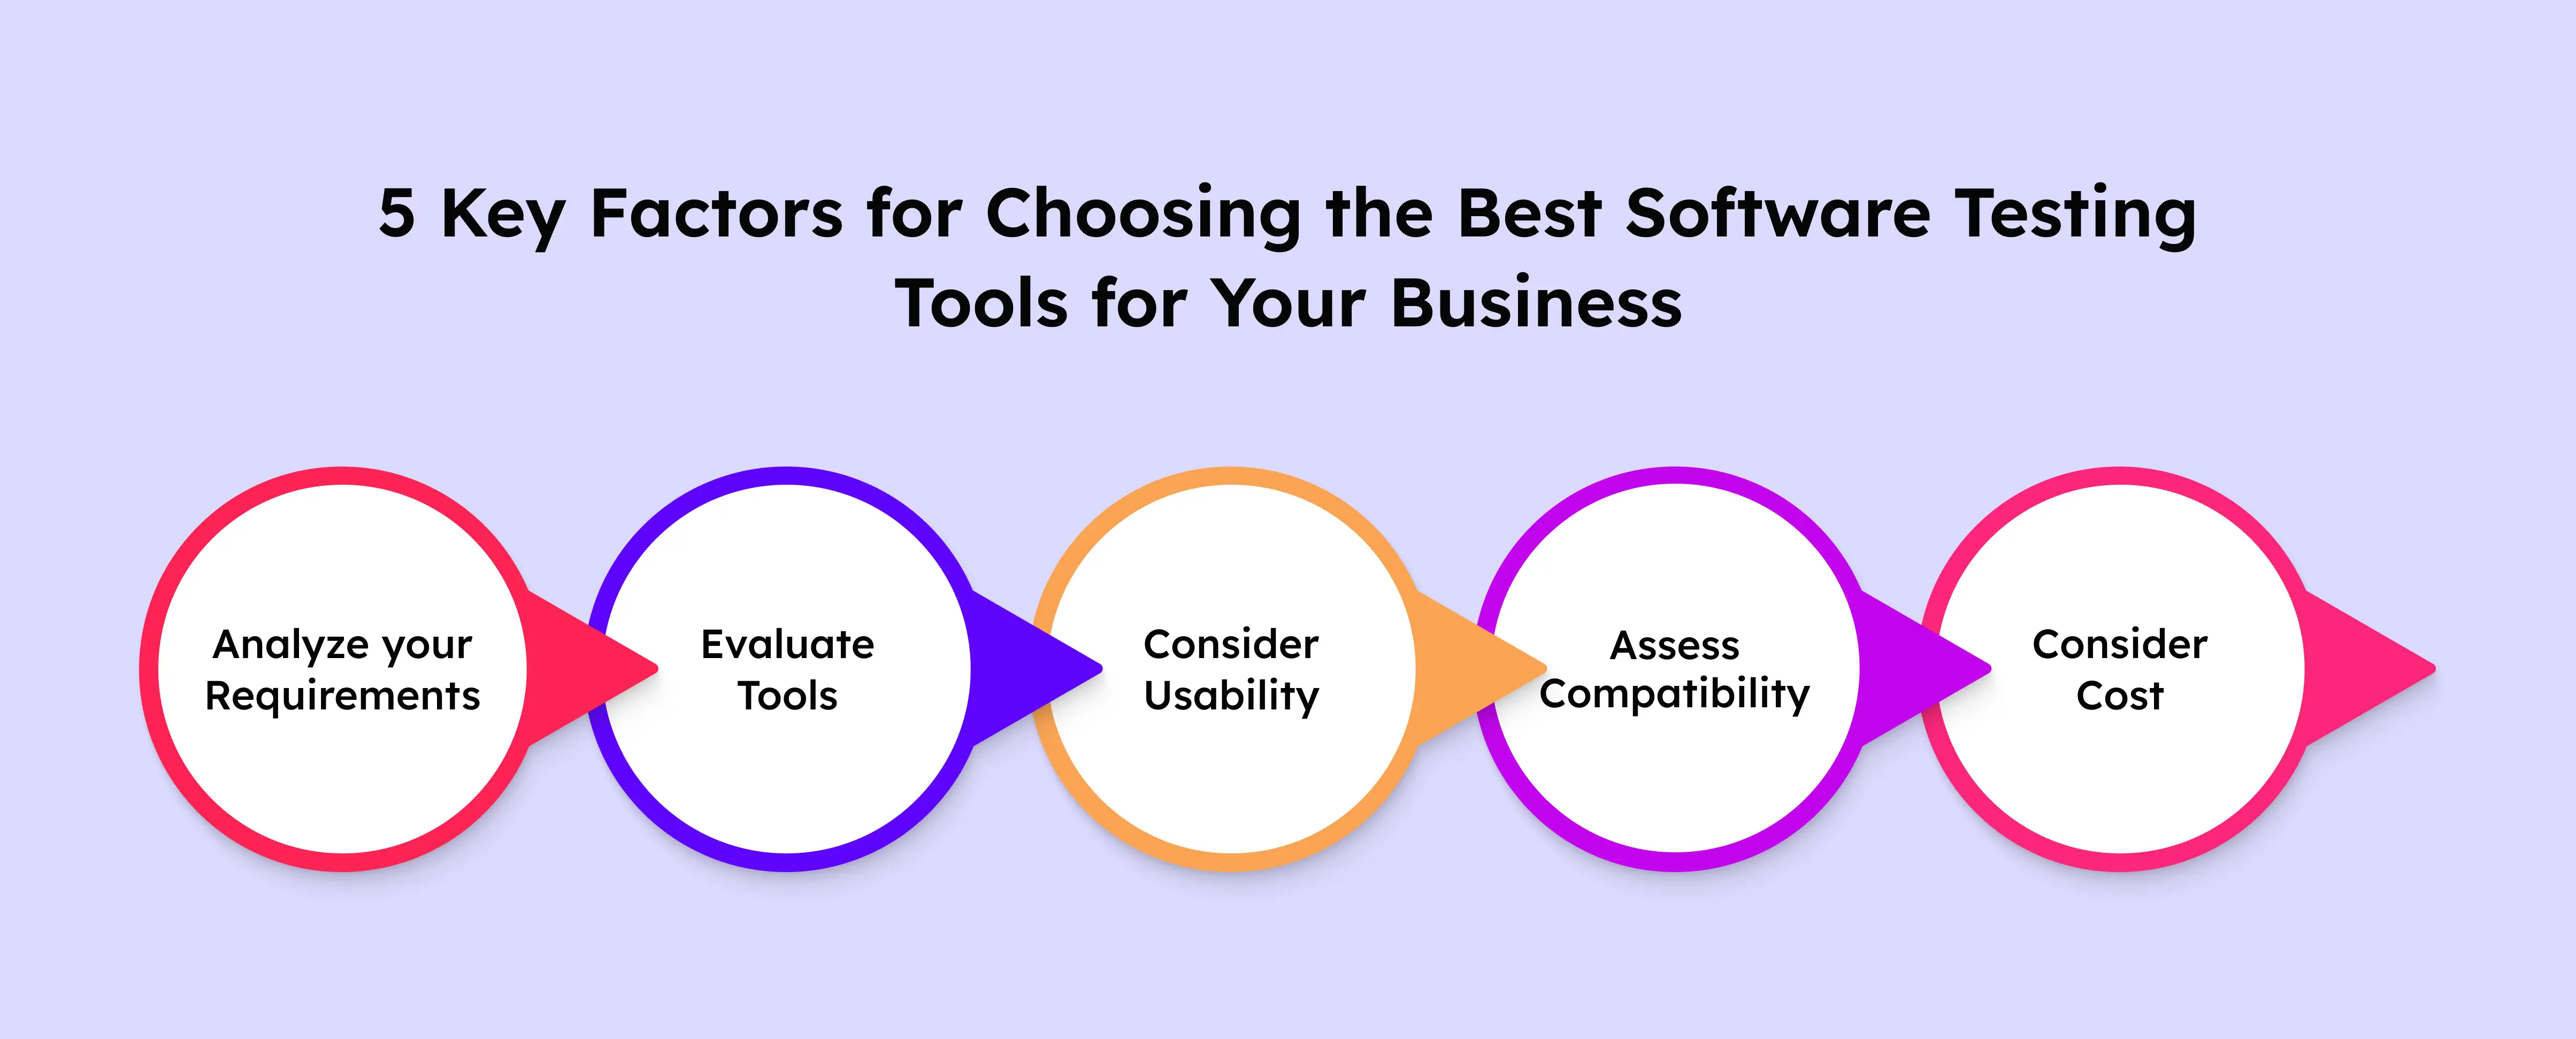 A Visual representation of 5 Key Factors for Choosing the Best Software Testing Tools for Your Business.